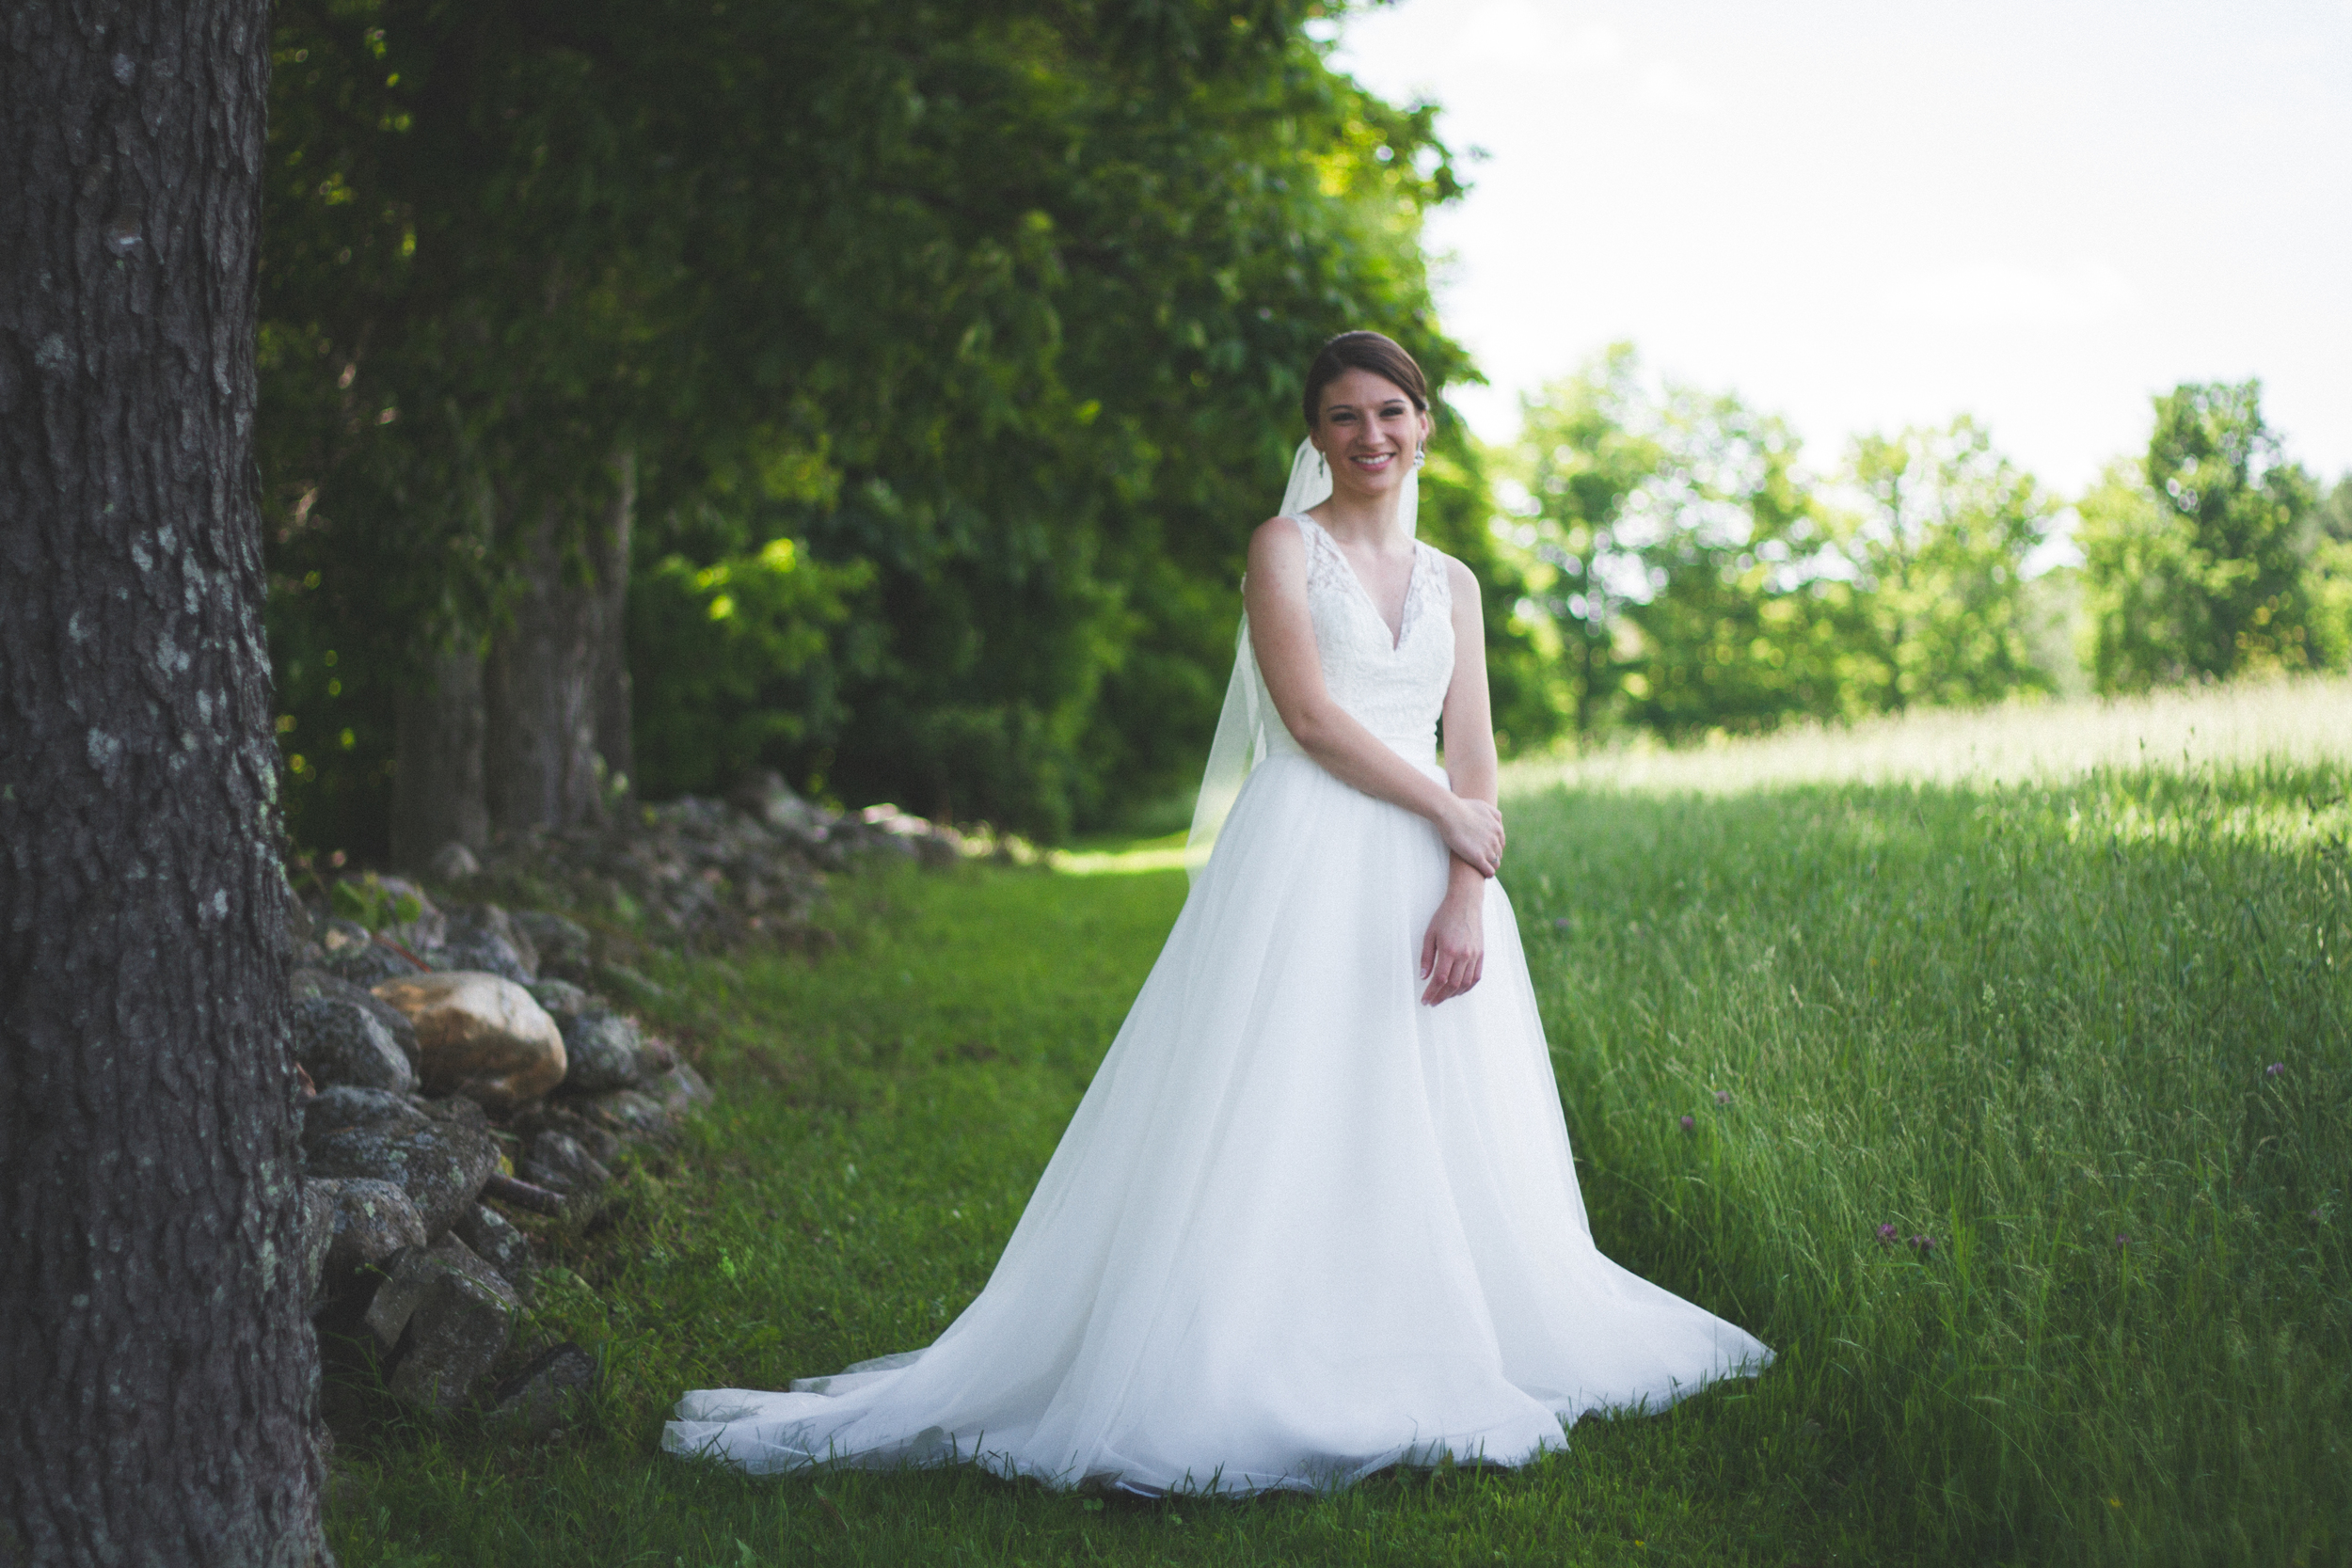 Bride at Bliss Farm in Granville, Massachusetts. Sweet Alice Photography.